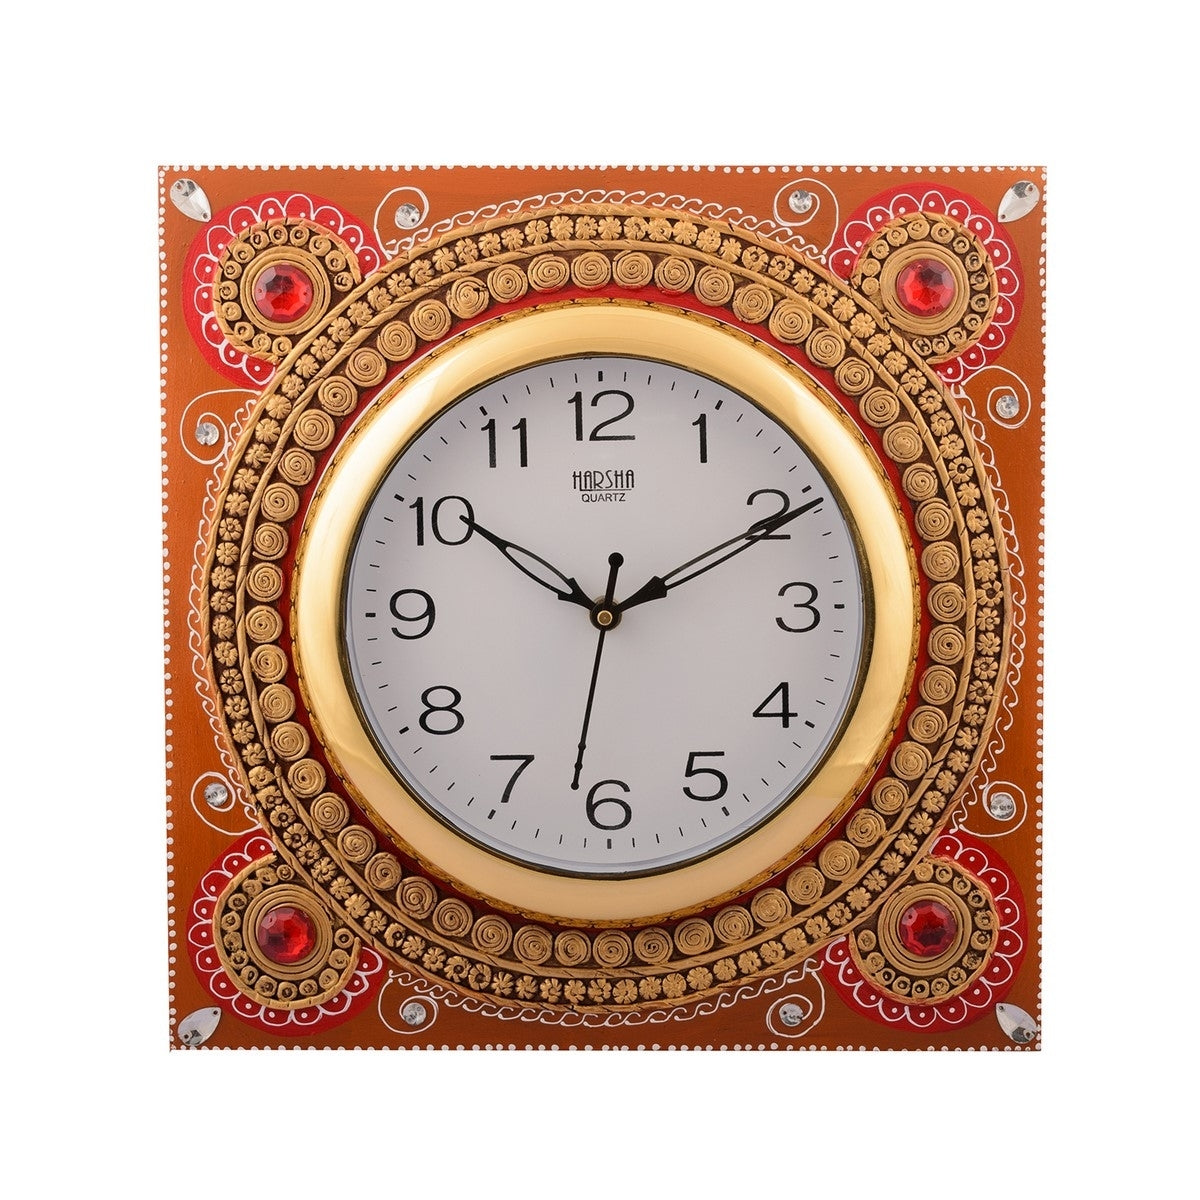 Dazzling Artistic Handcrafted Square Shape Papier Mache Wooden Wall Clock